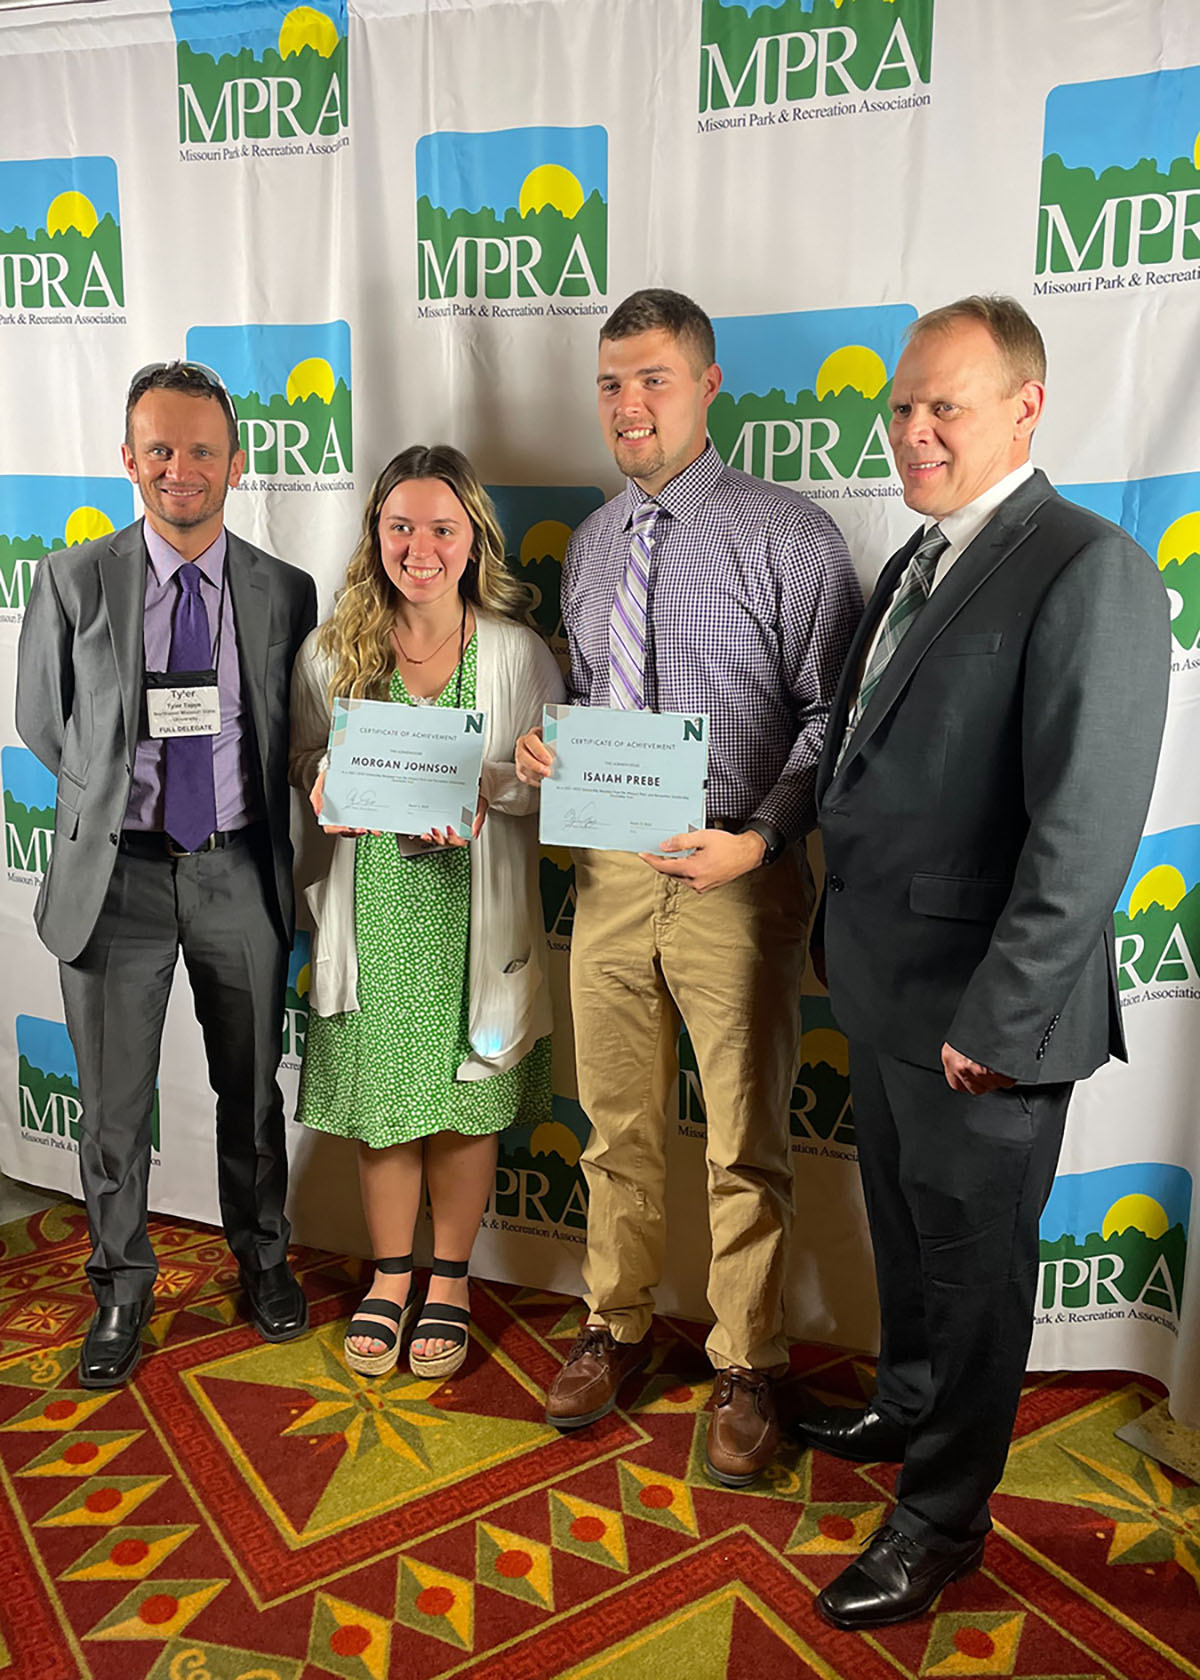 Pictured, left to right, are Associate Professor of Recreation Dr. Tyler Tapps, Morgan Johnson, Isaiah Prebe and Dr. Terry Long, the director of Northwest's School of Health Science and Wellness, as Johnson and Prebe accepted undergraduate scholarship awards from the Missouri Park and Recreation Association Charitable Trust. (Submitted photo)